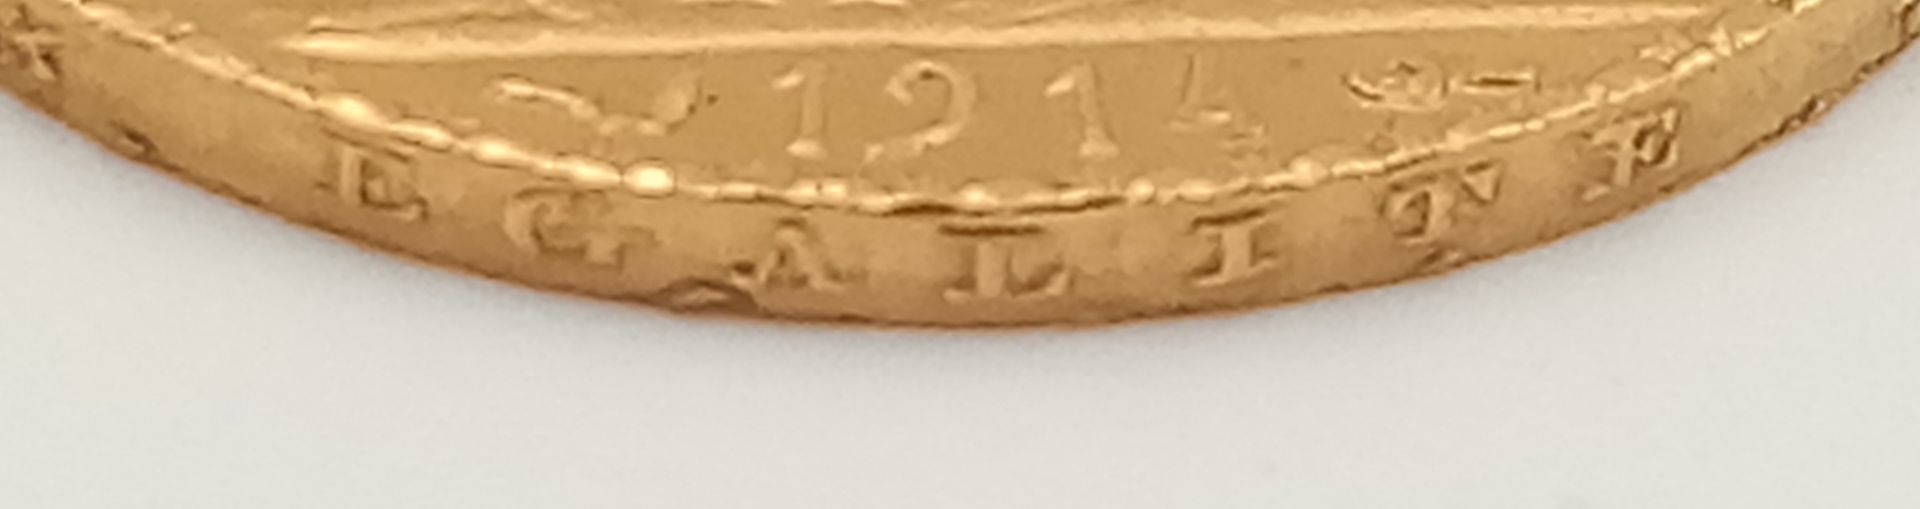 A French gold 20 Francs 1914 coin, very collectable - Bild 3 aus 5